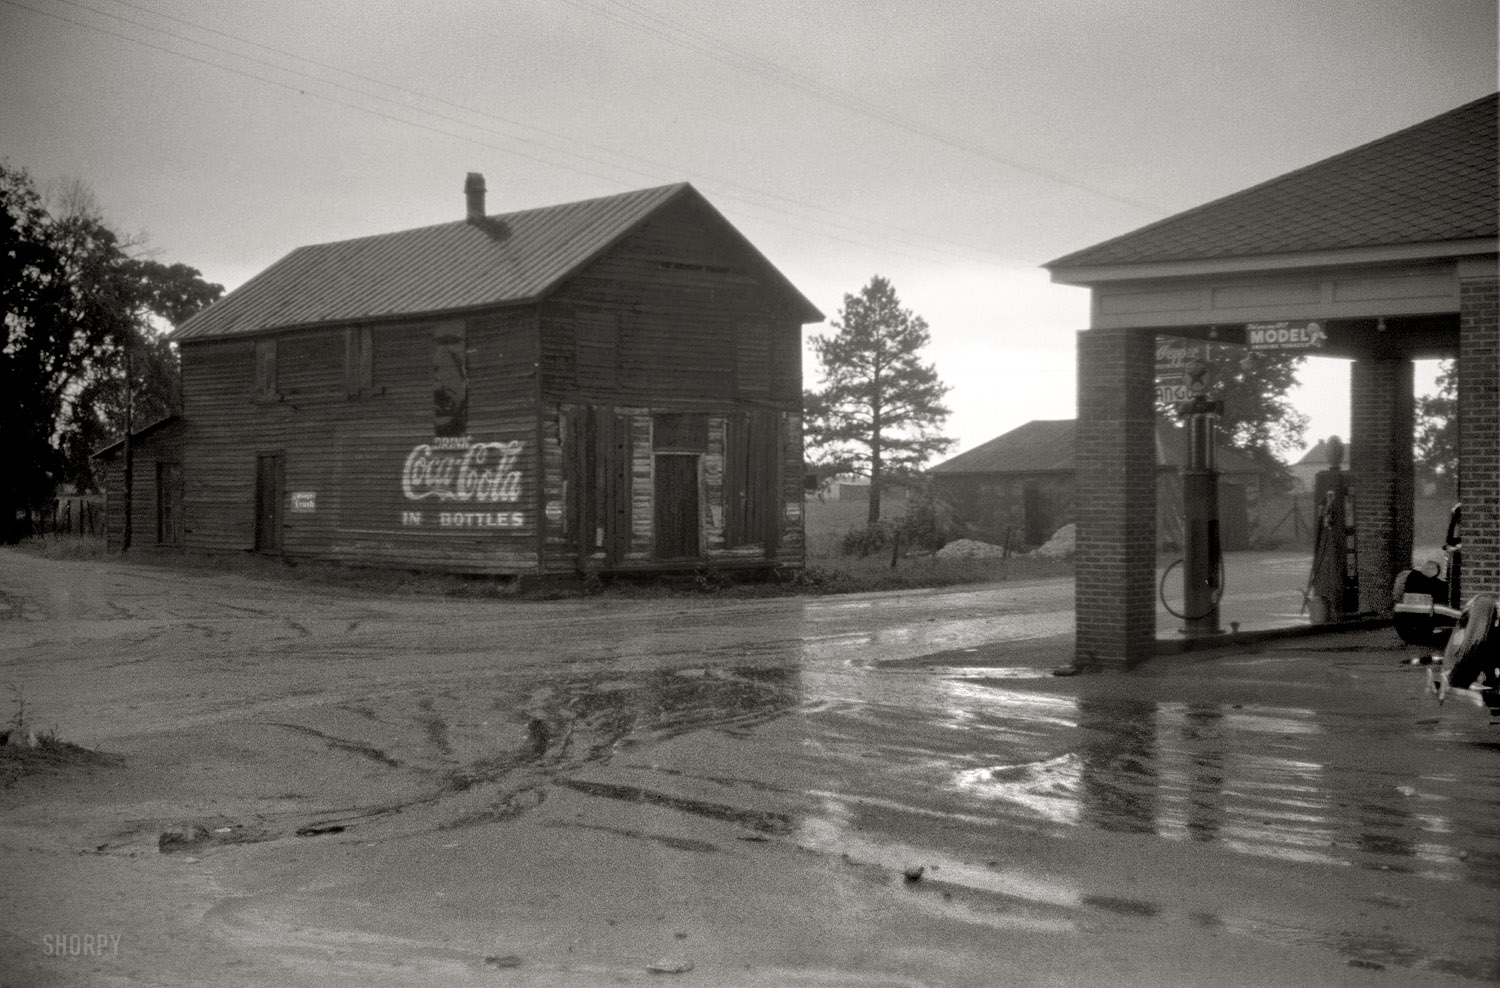 May 1940. Stem, North Carolina. "Crossroads garage and store." 35mm nitrate negative by Jack Delano for the Resettlement Administration. View full size.